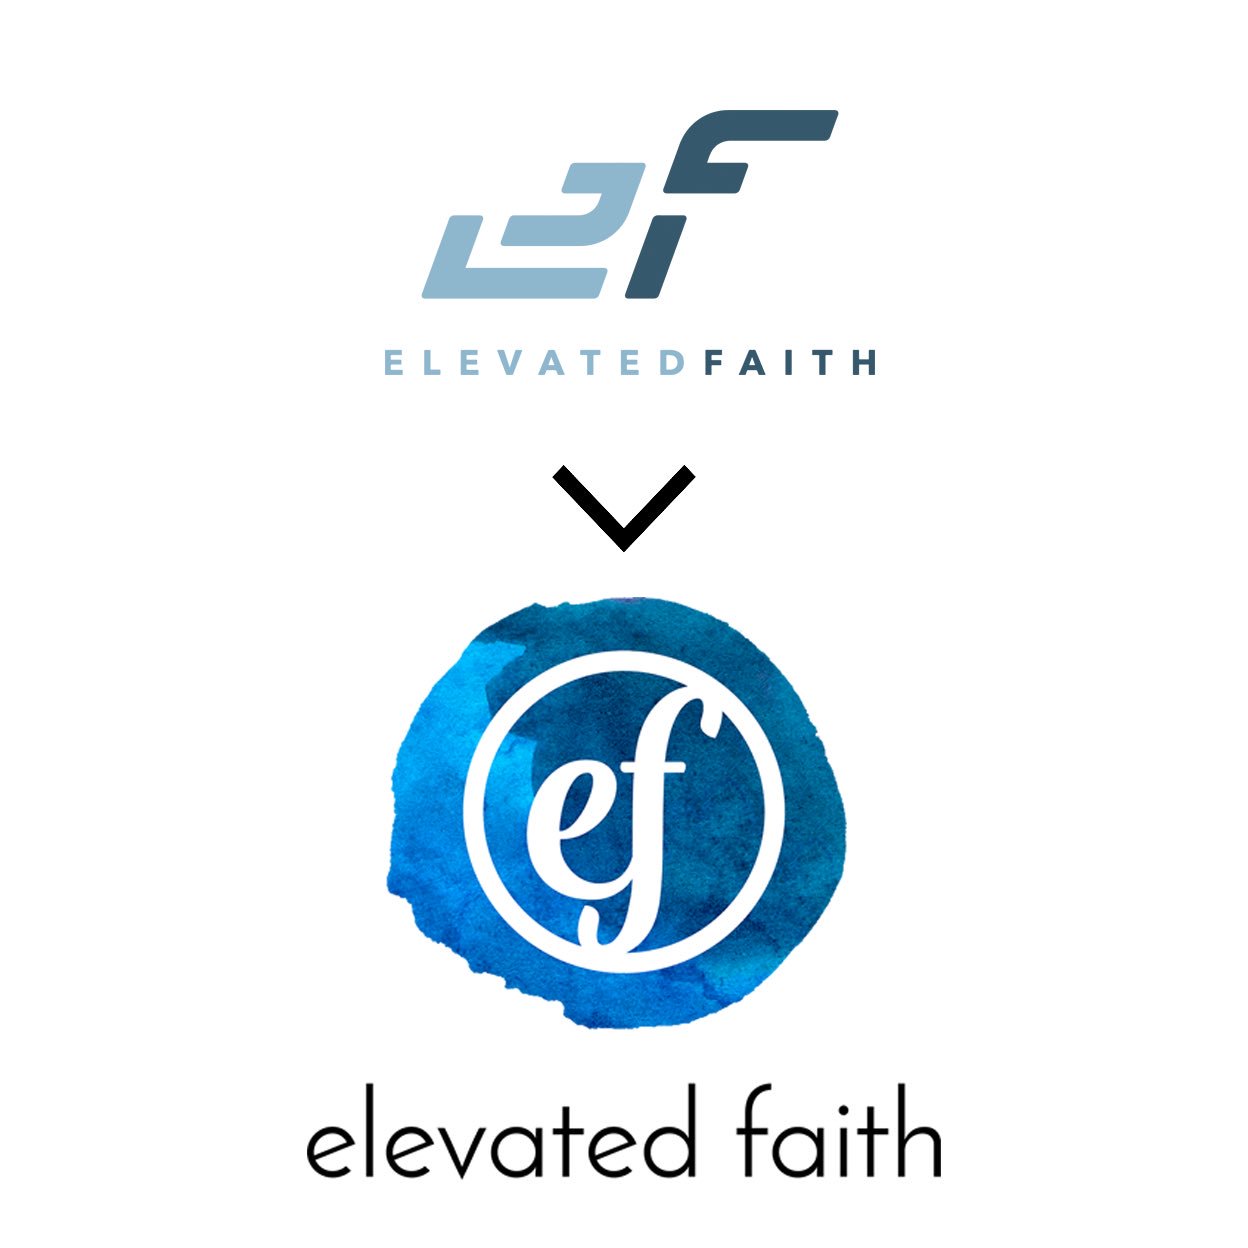 Elevated Faith on X: HUGE NEWS!! We are excited to announce that Elevated  Faith has had a branding makeover! What do you think of our new logo?! 😎  Our mission is still